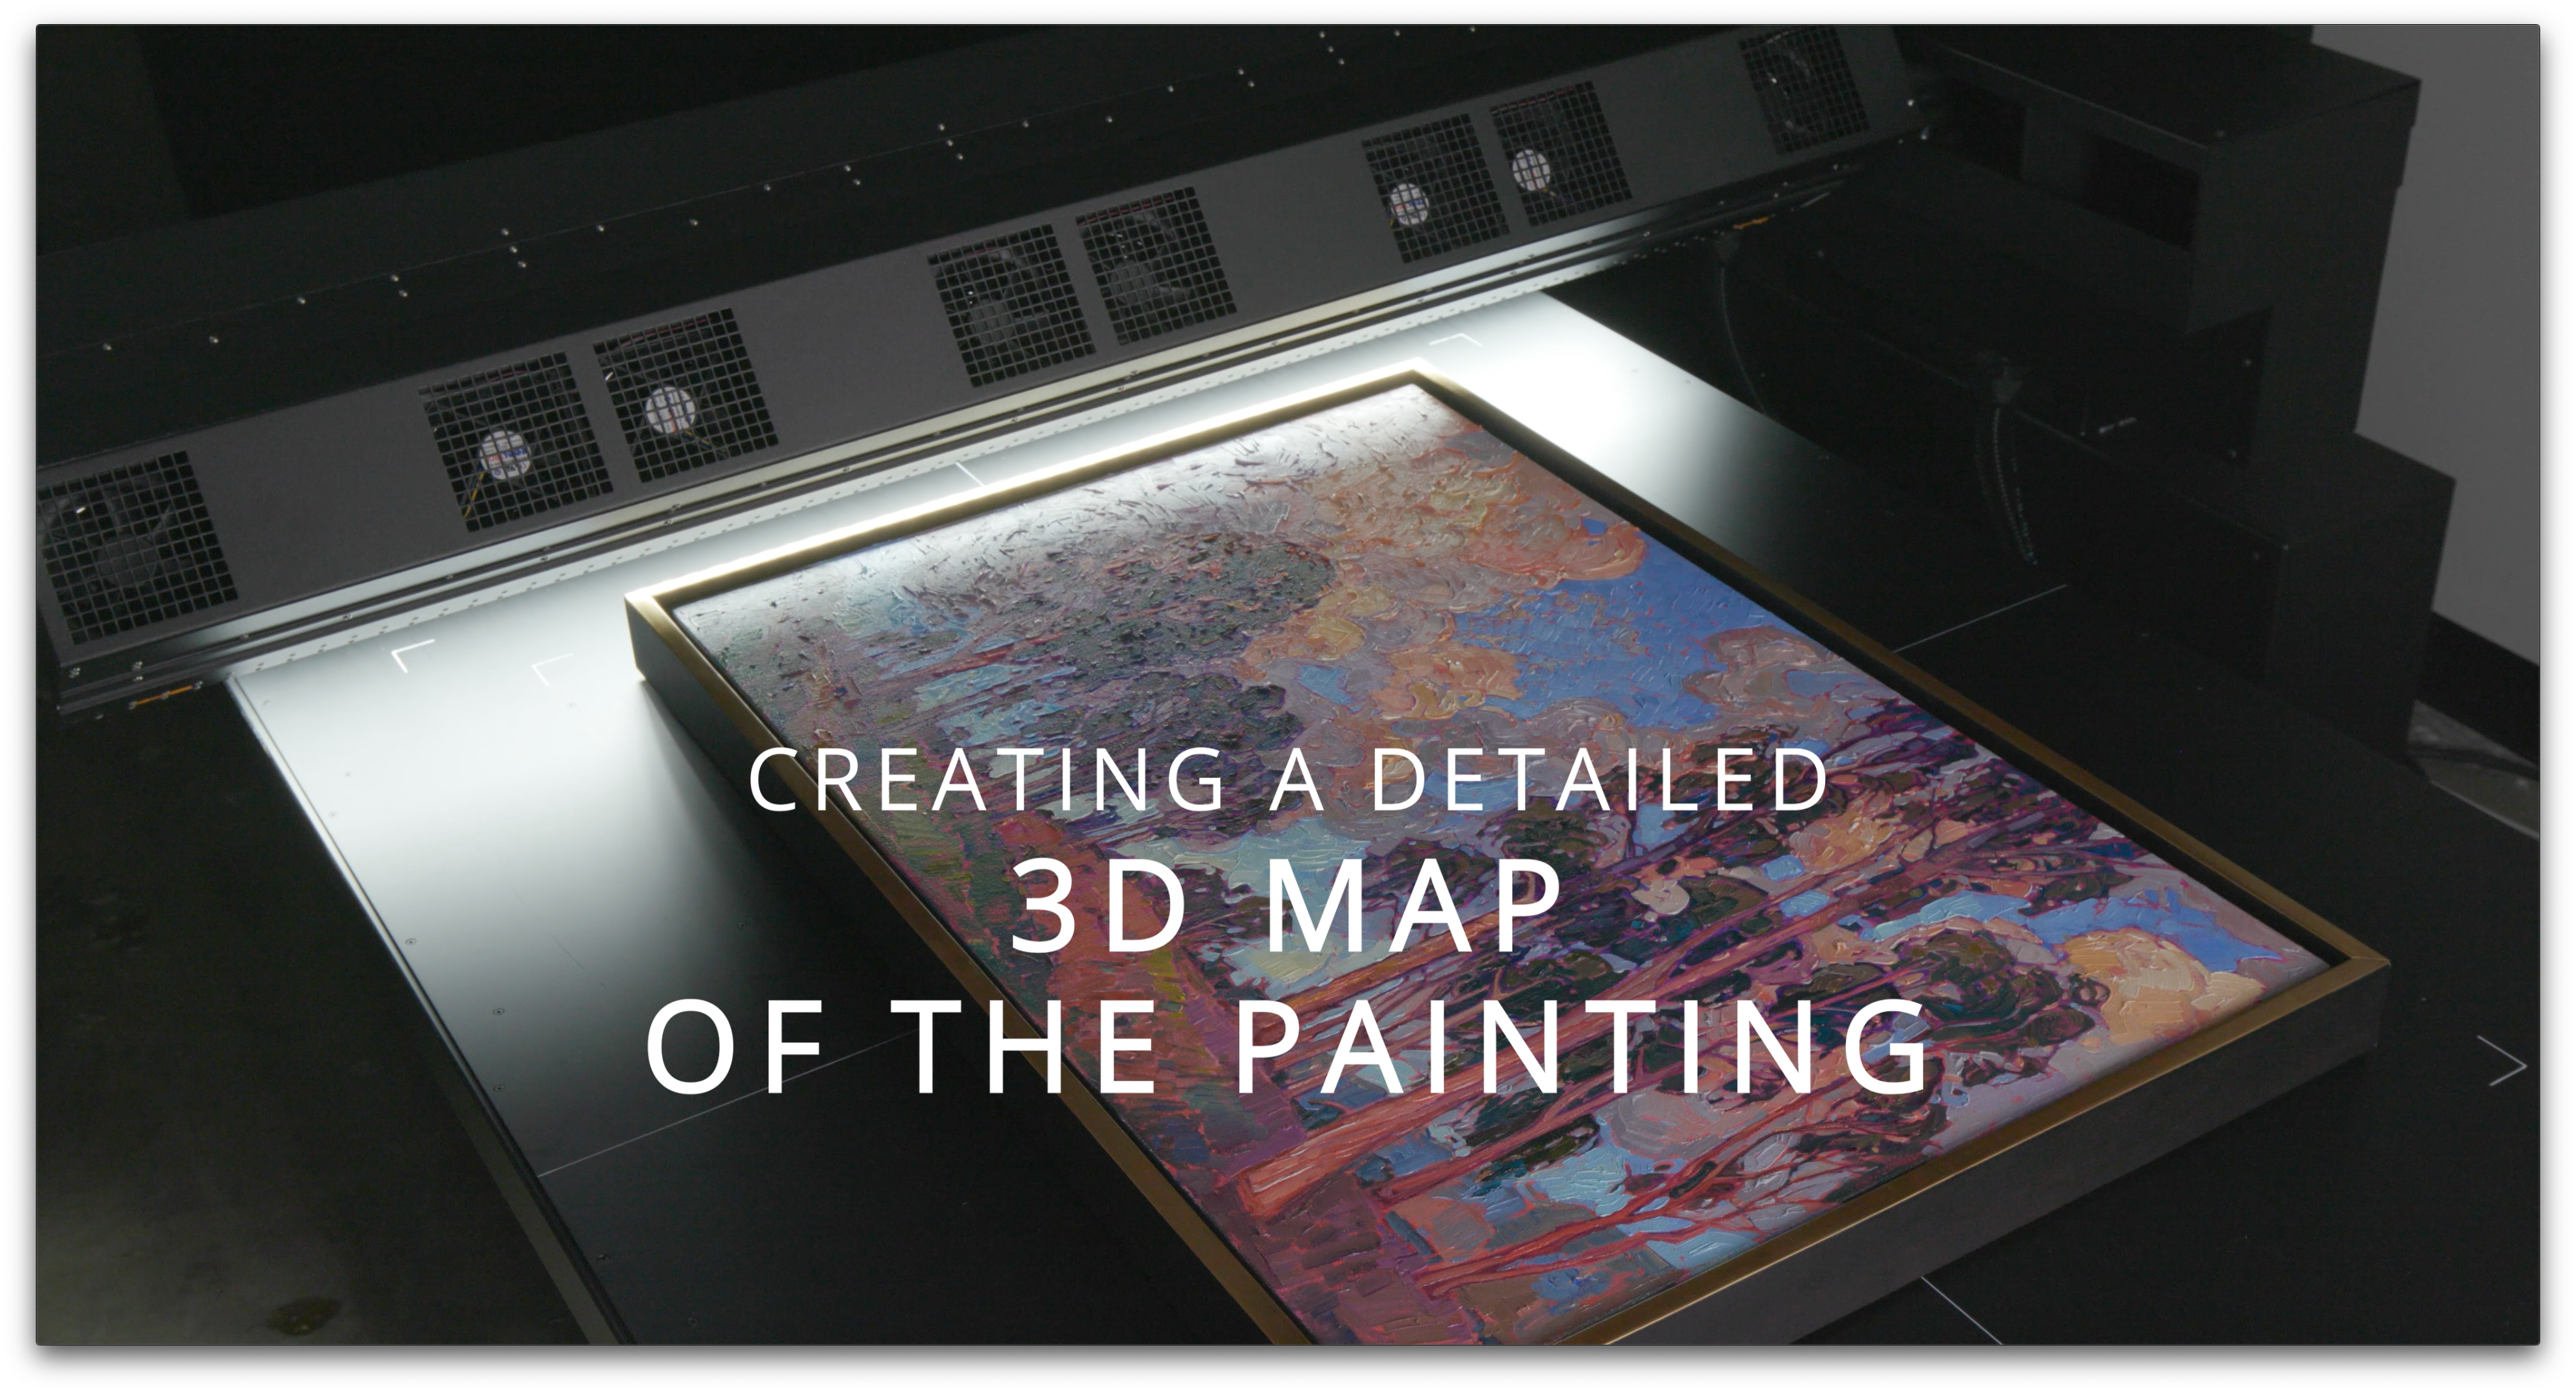 Creating a detailed 3D map of the painting